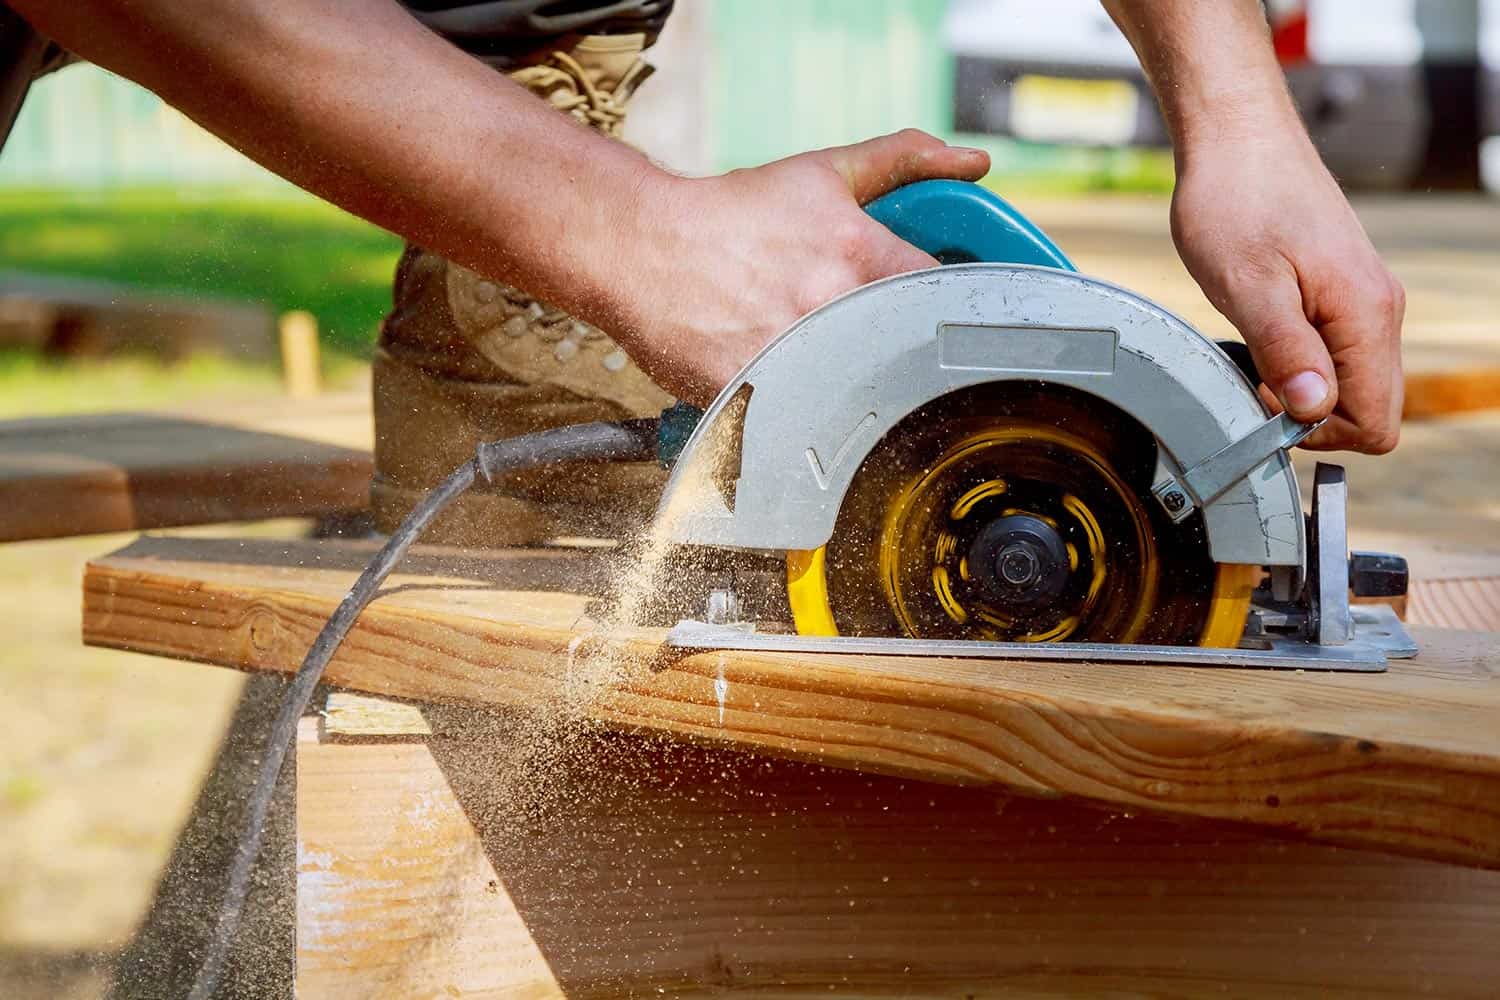 Builder saws a board with a circular saw cutting a wooden plank